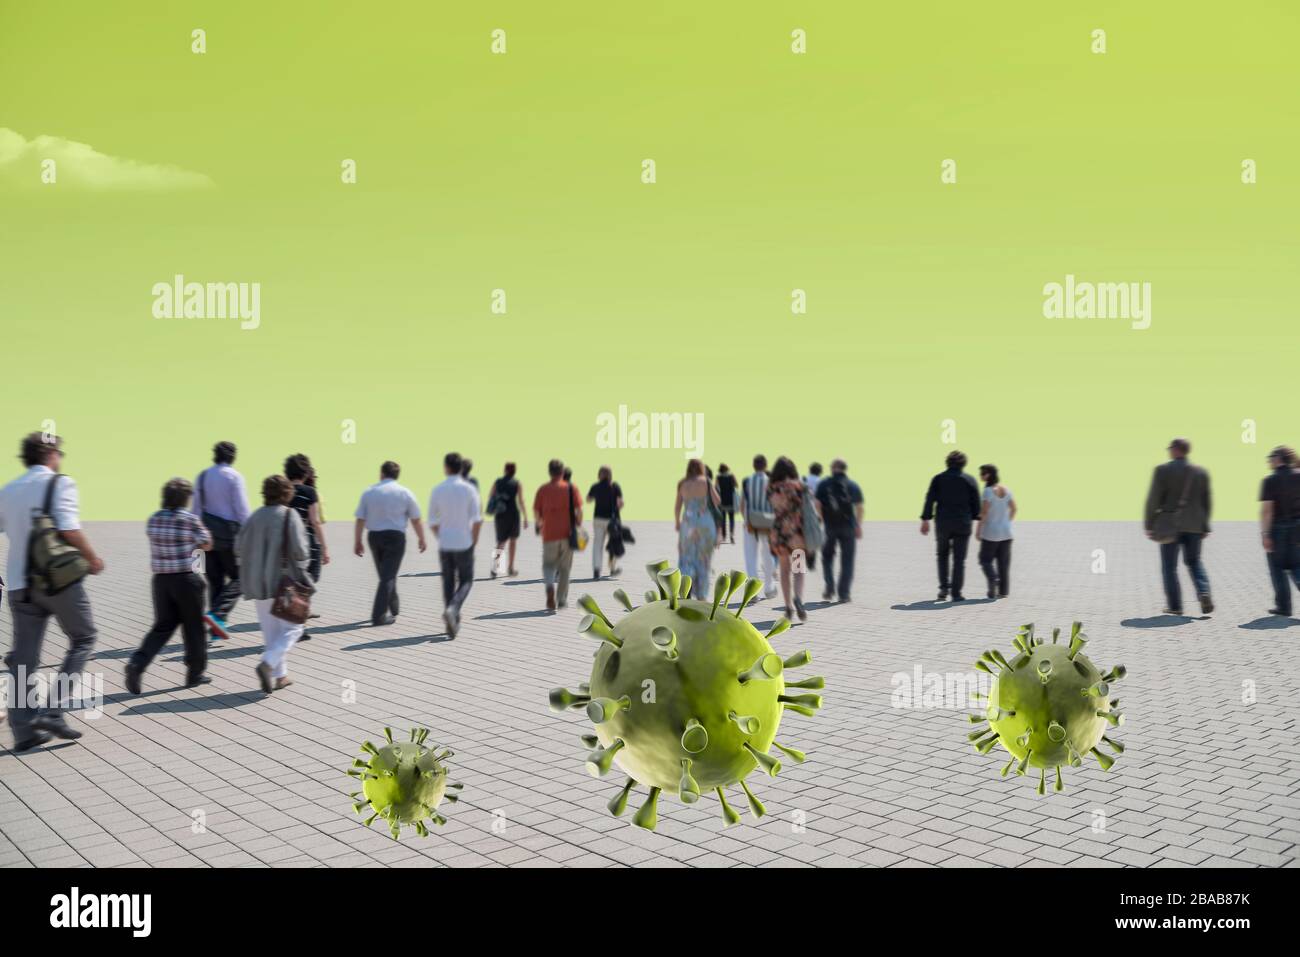 Corona Concept: Unidentifiable people walking in pedestrian area close to each other with corona virus renderings inbetween Stock Photo